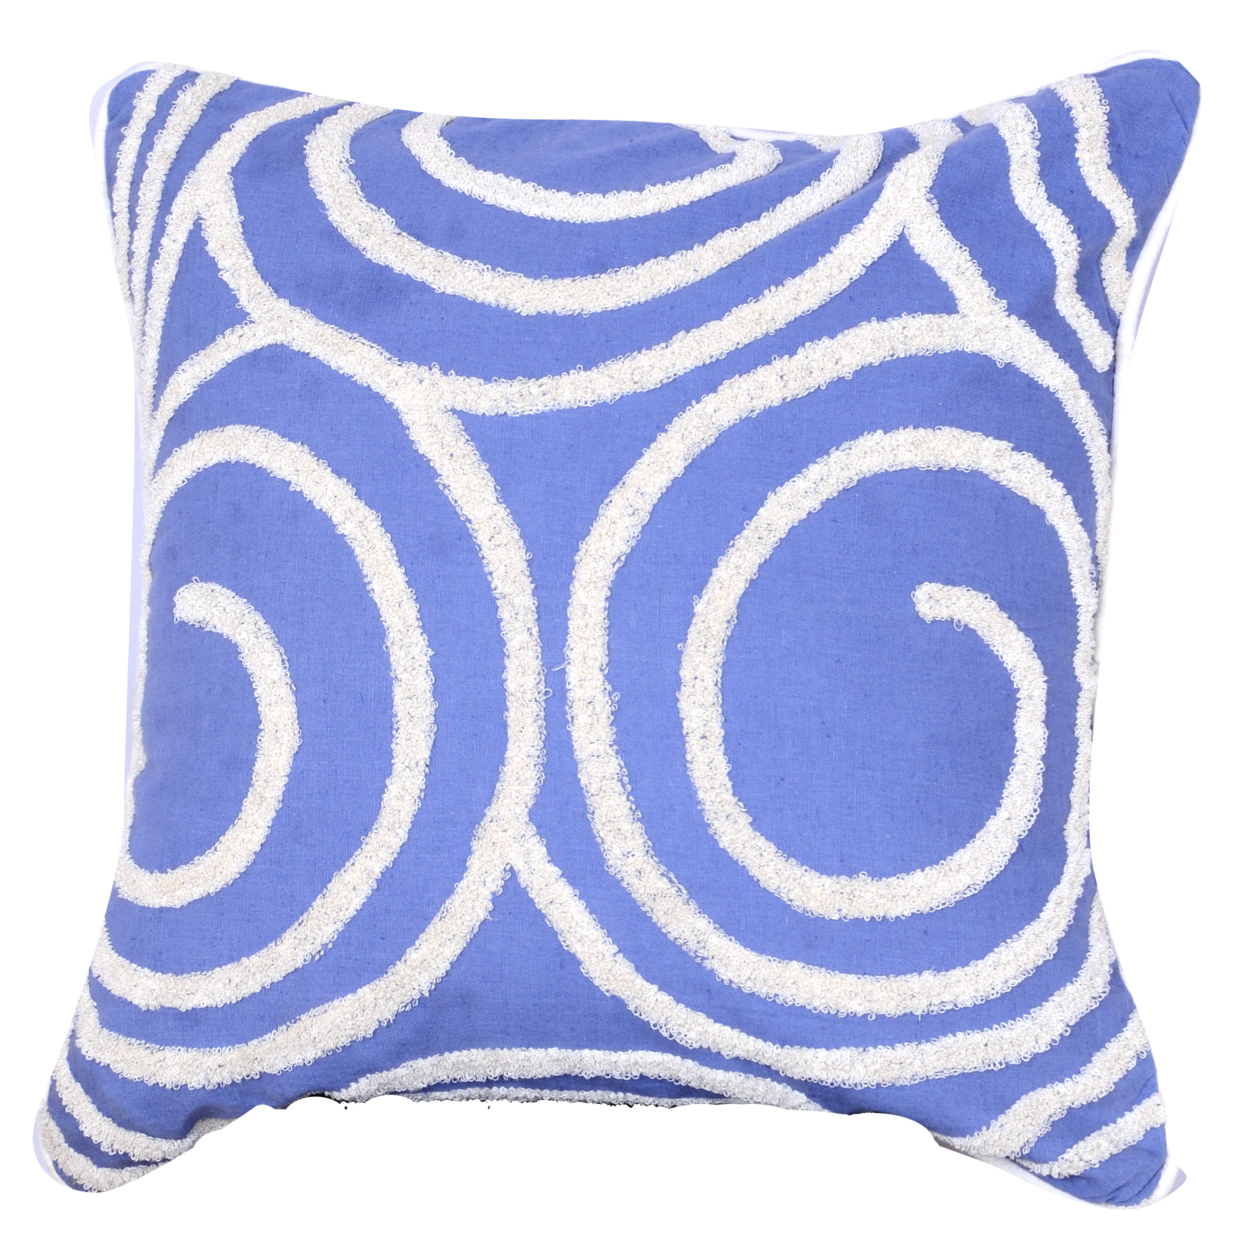 18 X 18 Inch Cotton Pillow With Spiral Embroidery, Set Of 2, Blue And White- Saltoro Sherpi